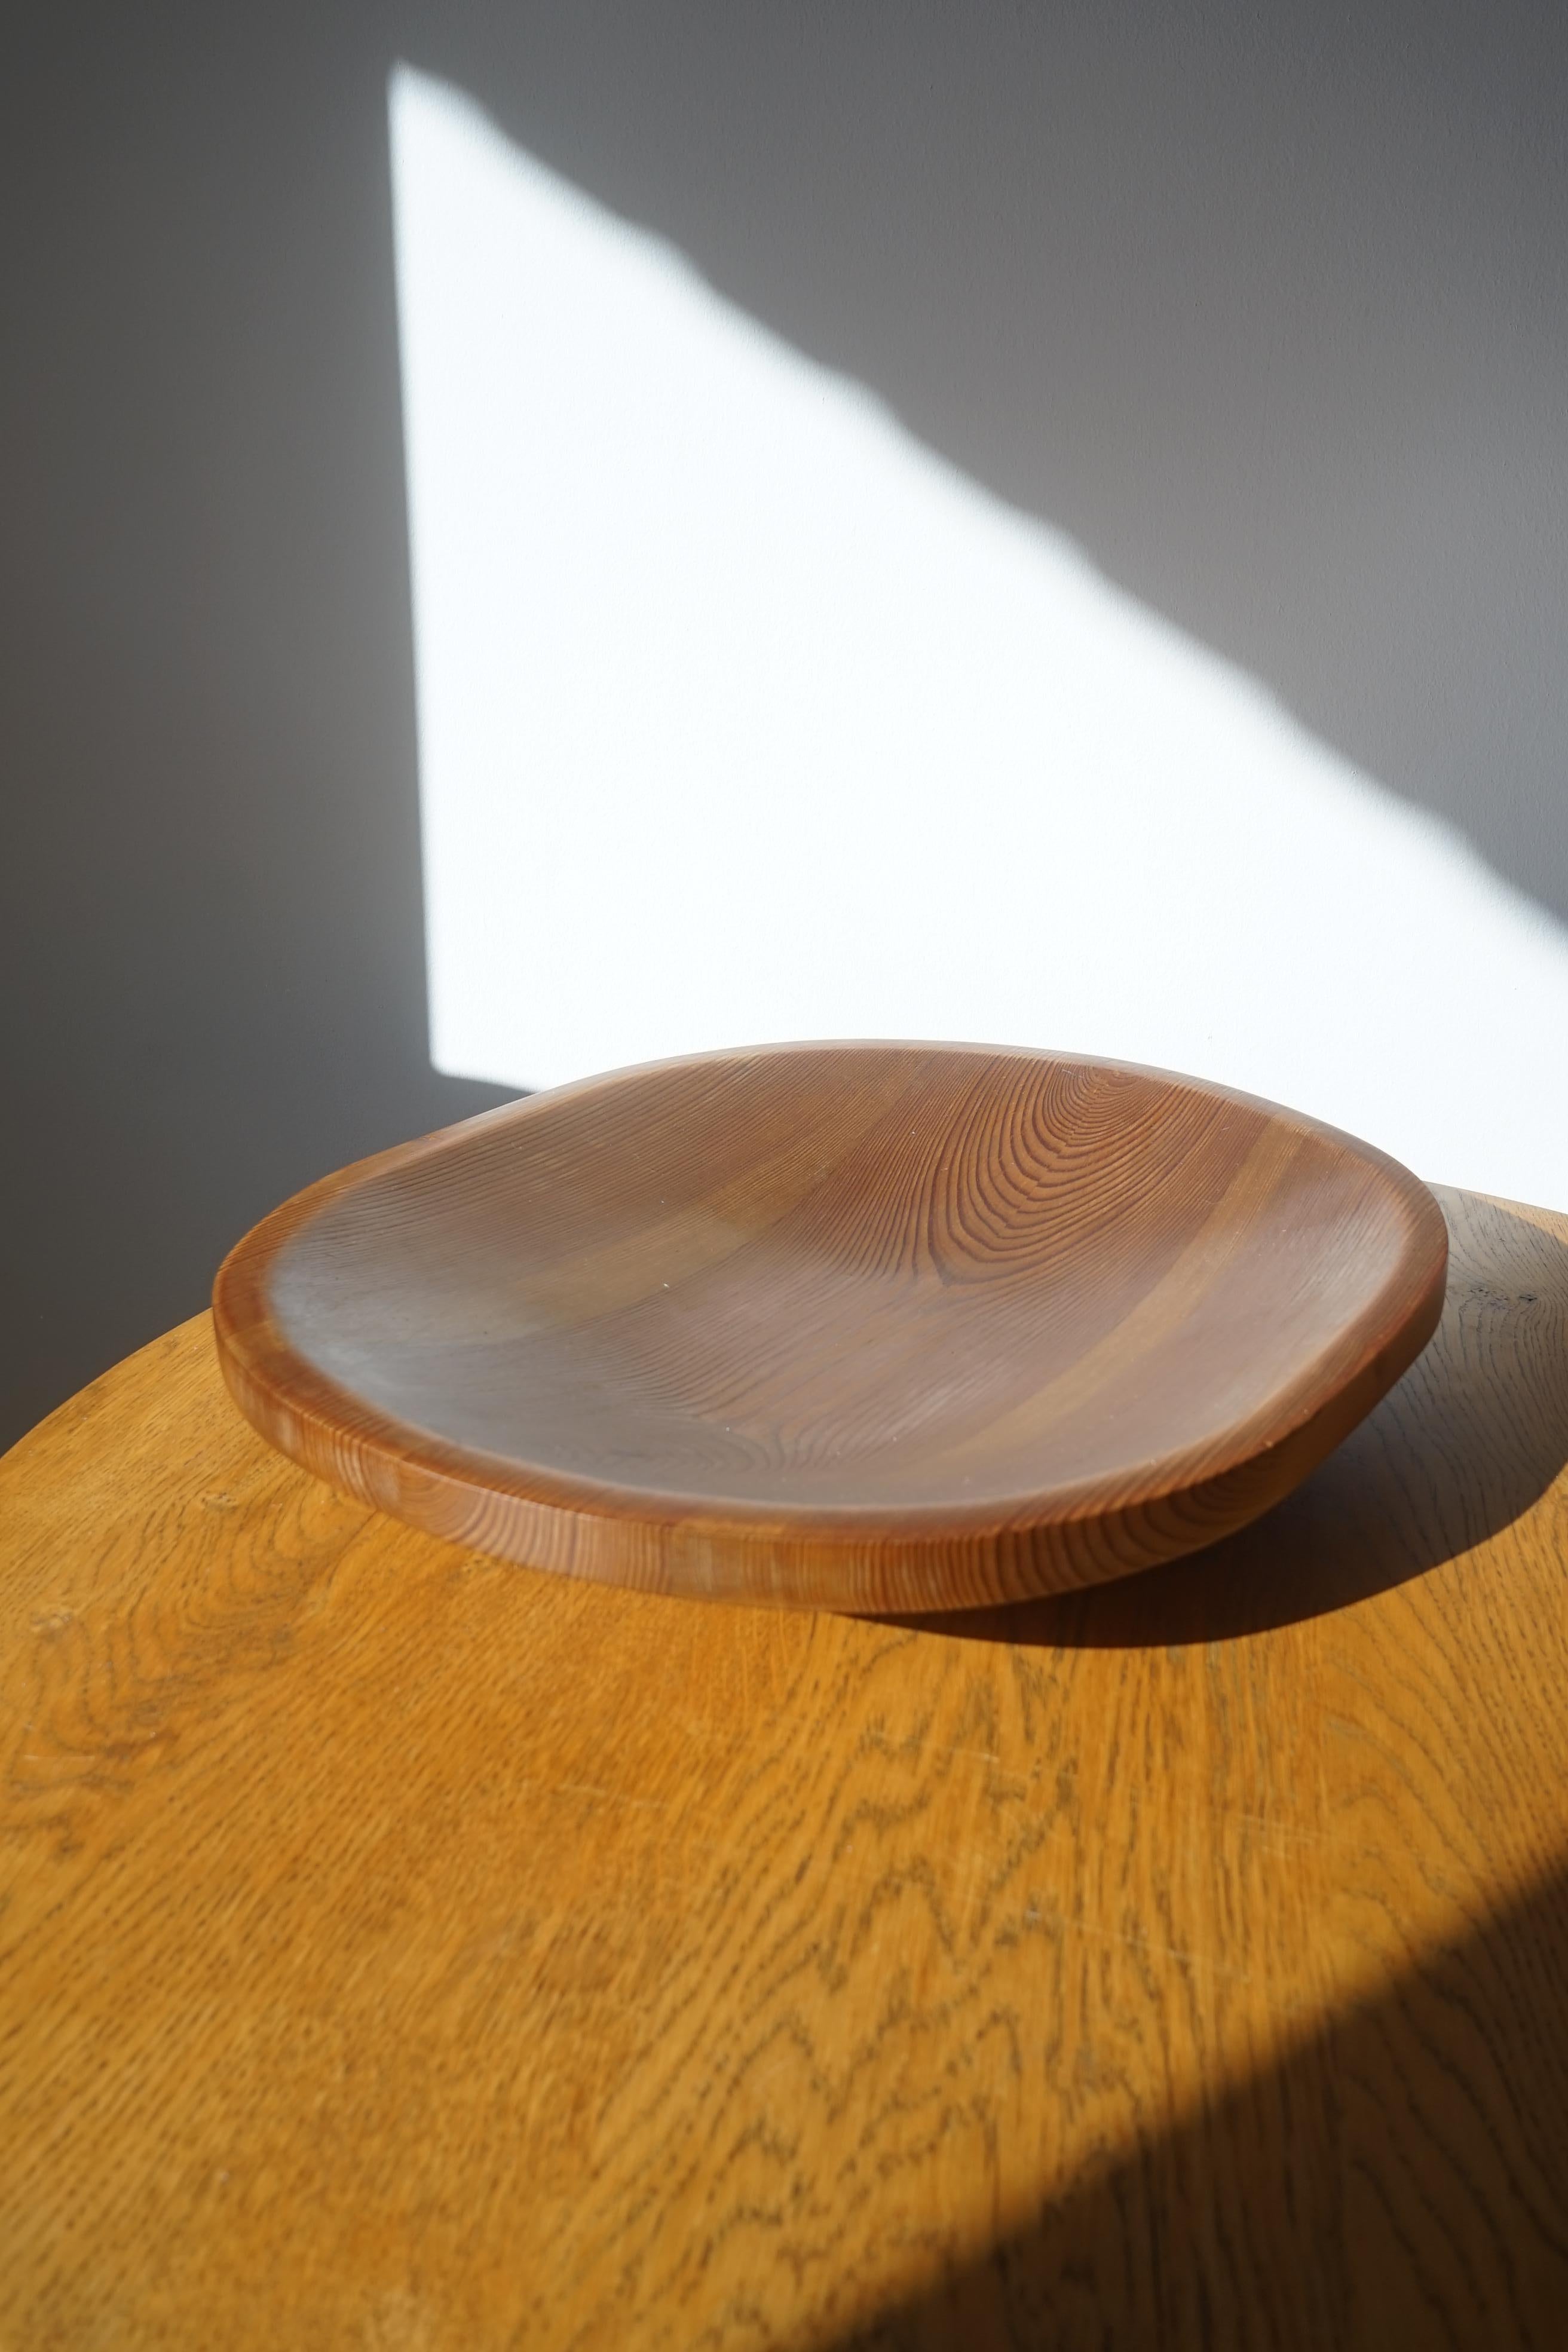 Big solid pine bowl/tray in the manner of Axel Einar Hjorth.

The bowl is in good original condition with light signs of use.

It will fit any interior and is the perfect fruit bowl or decorative object for any interior.

The bowl is typical